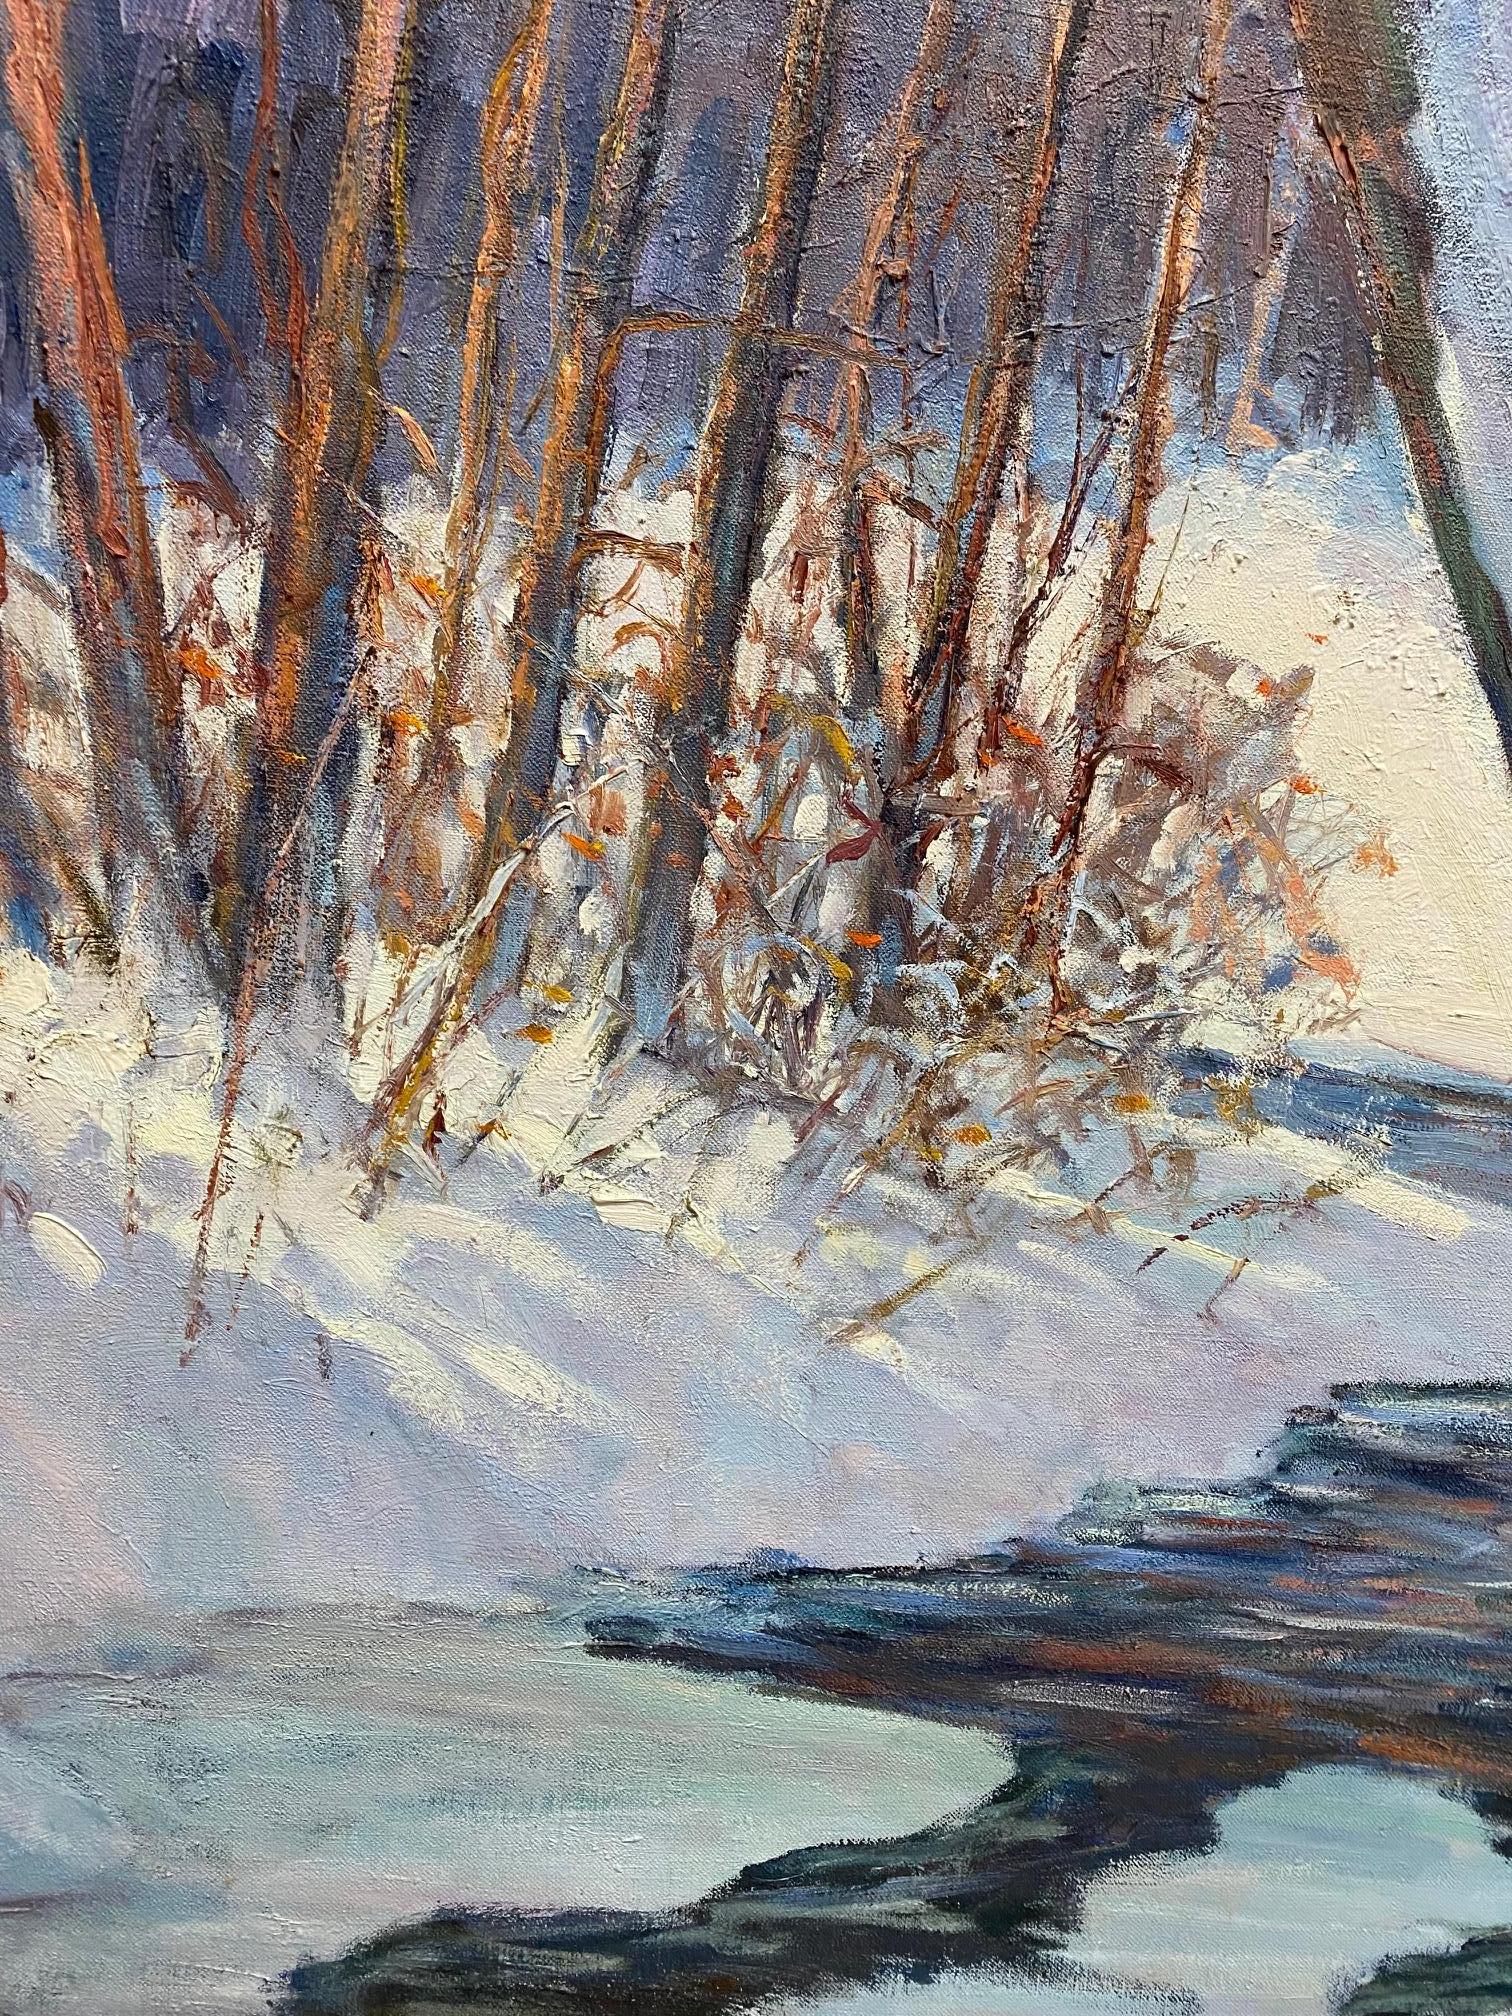 As the winter sunlight permeates the impressionist landscape's composition it also emanates a soul reaching warmth and beauty. The flowing stream and melting snow reminds the viewer that winter's purity and majesty is a temporary miracle to behold. 